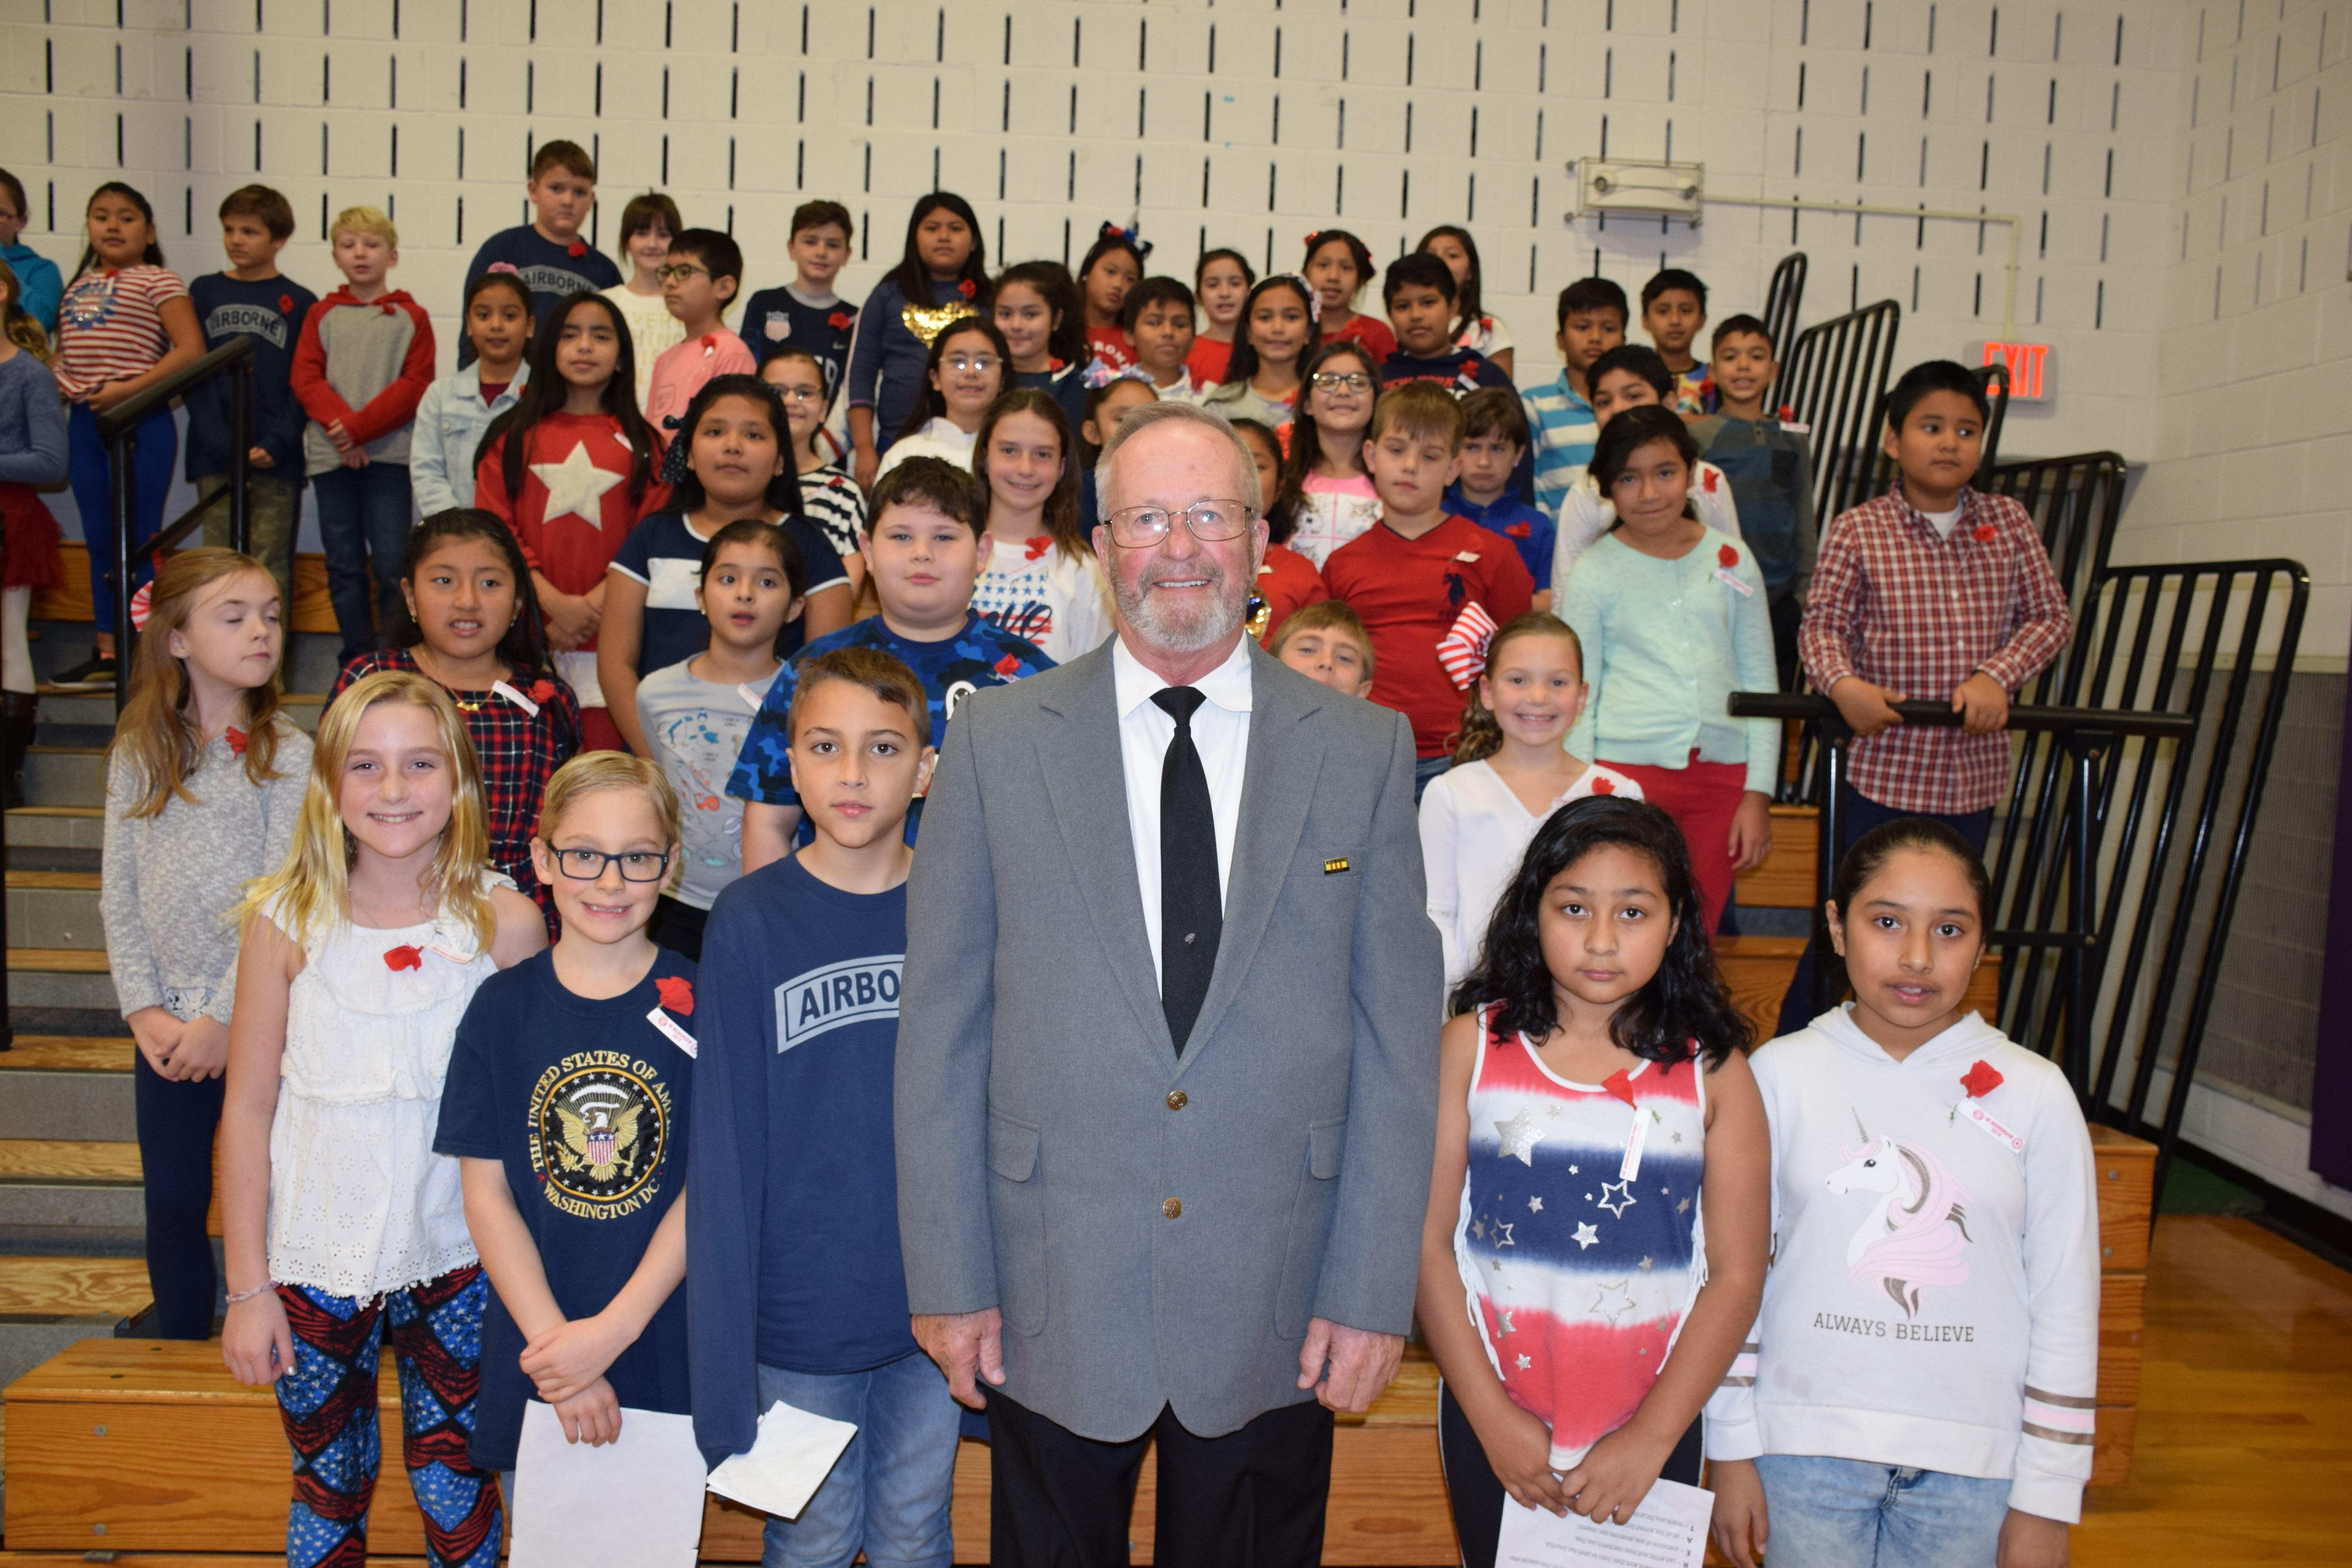 Hampton Bays students honored U.S. Navy veteran Leigh Penny during a flag ceremony on November 8.